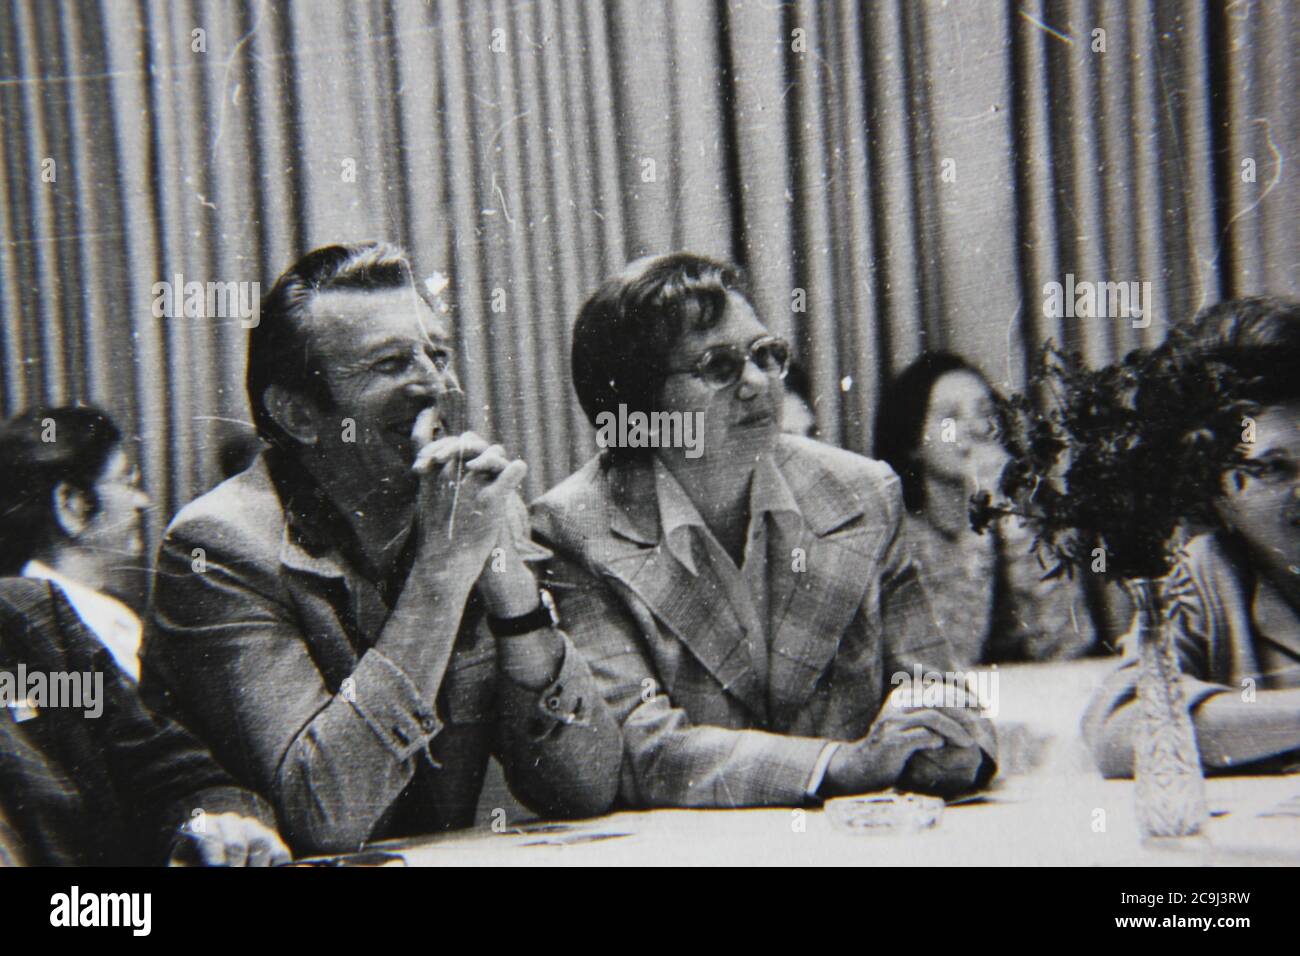 Fine 1970s vintage black and white photography of regular people mingling at a formal dinner party. Stock Photo